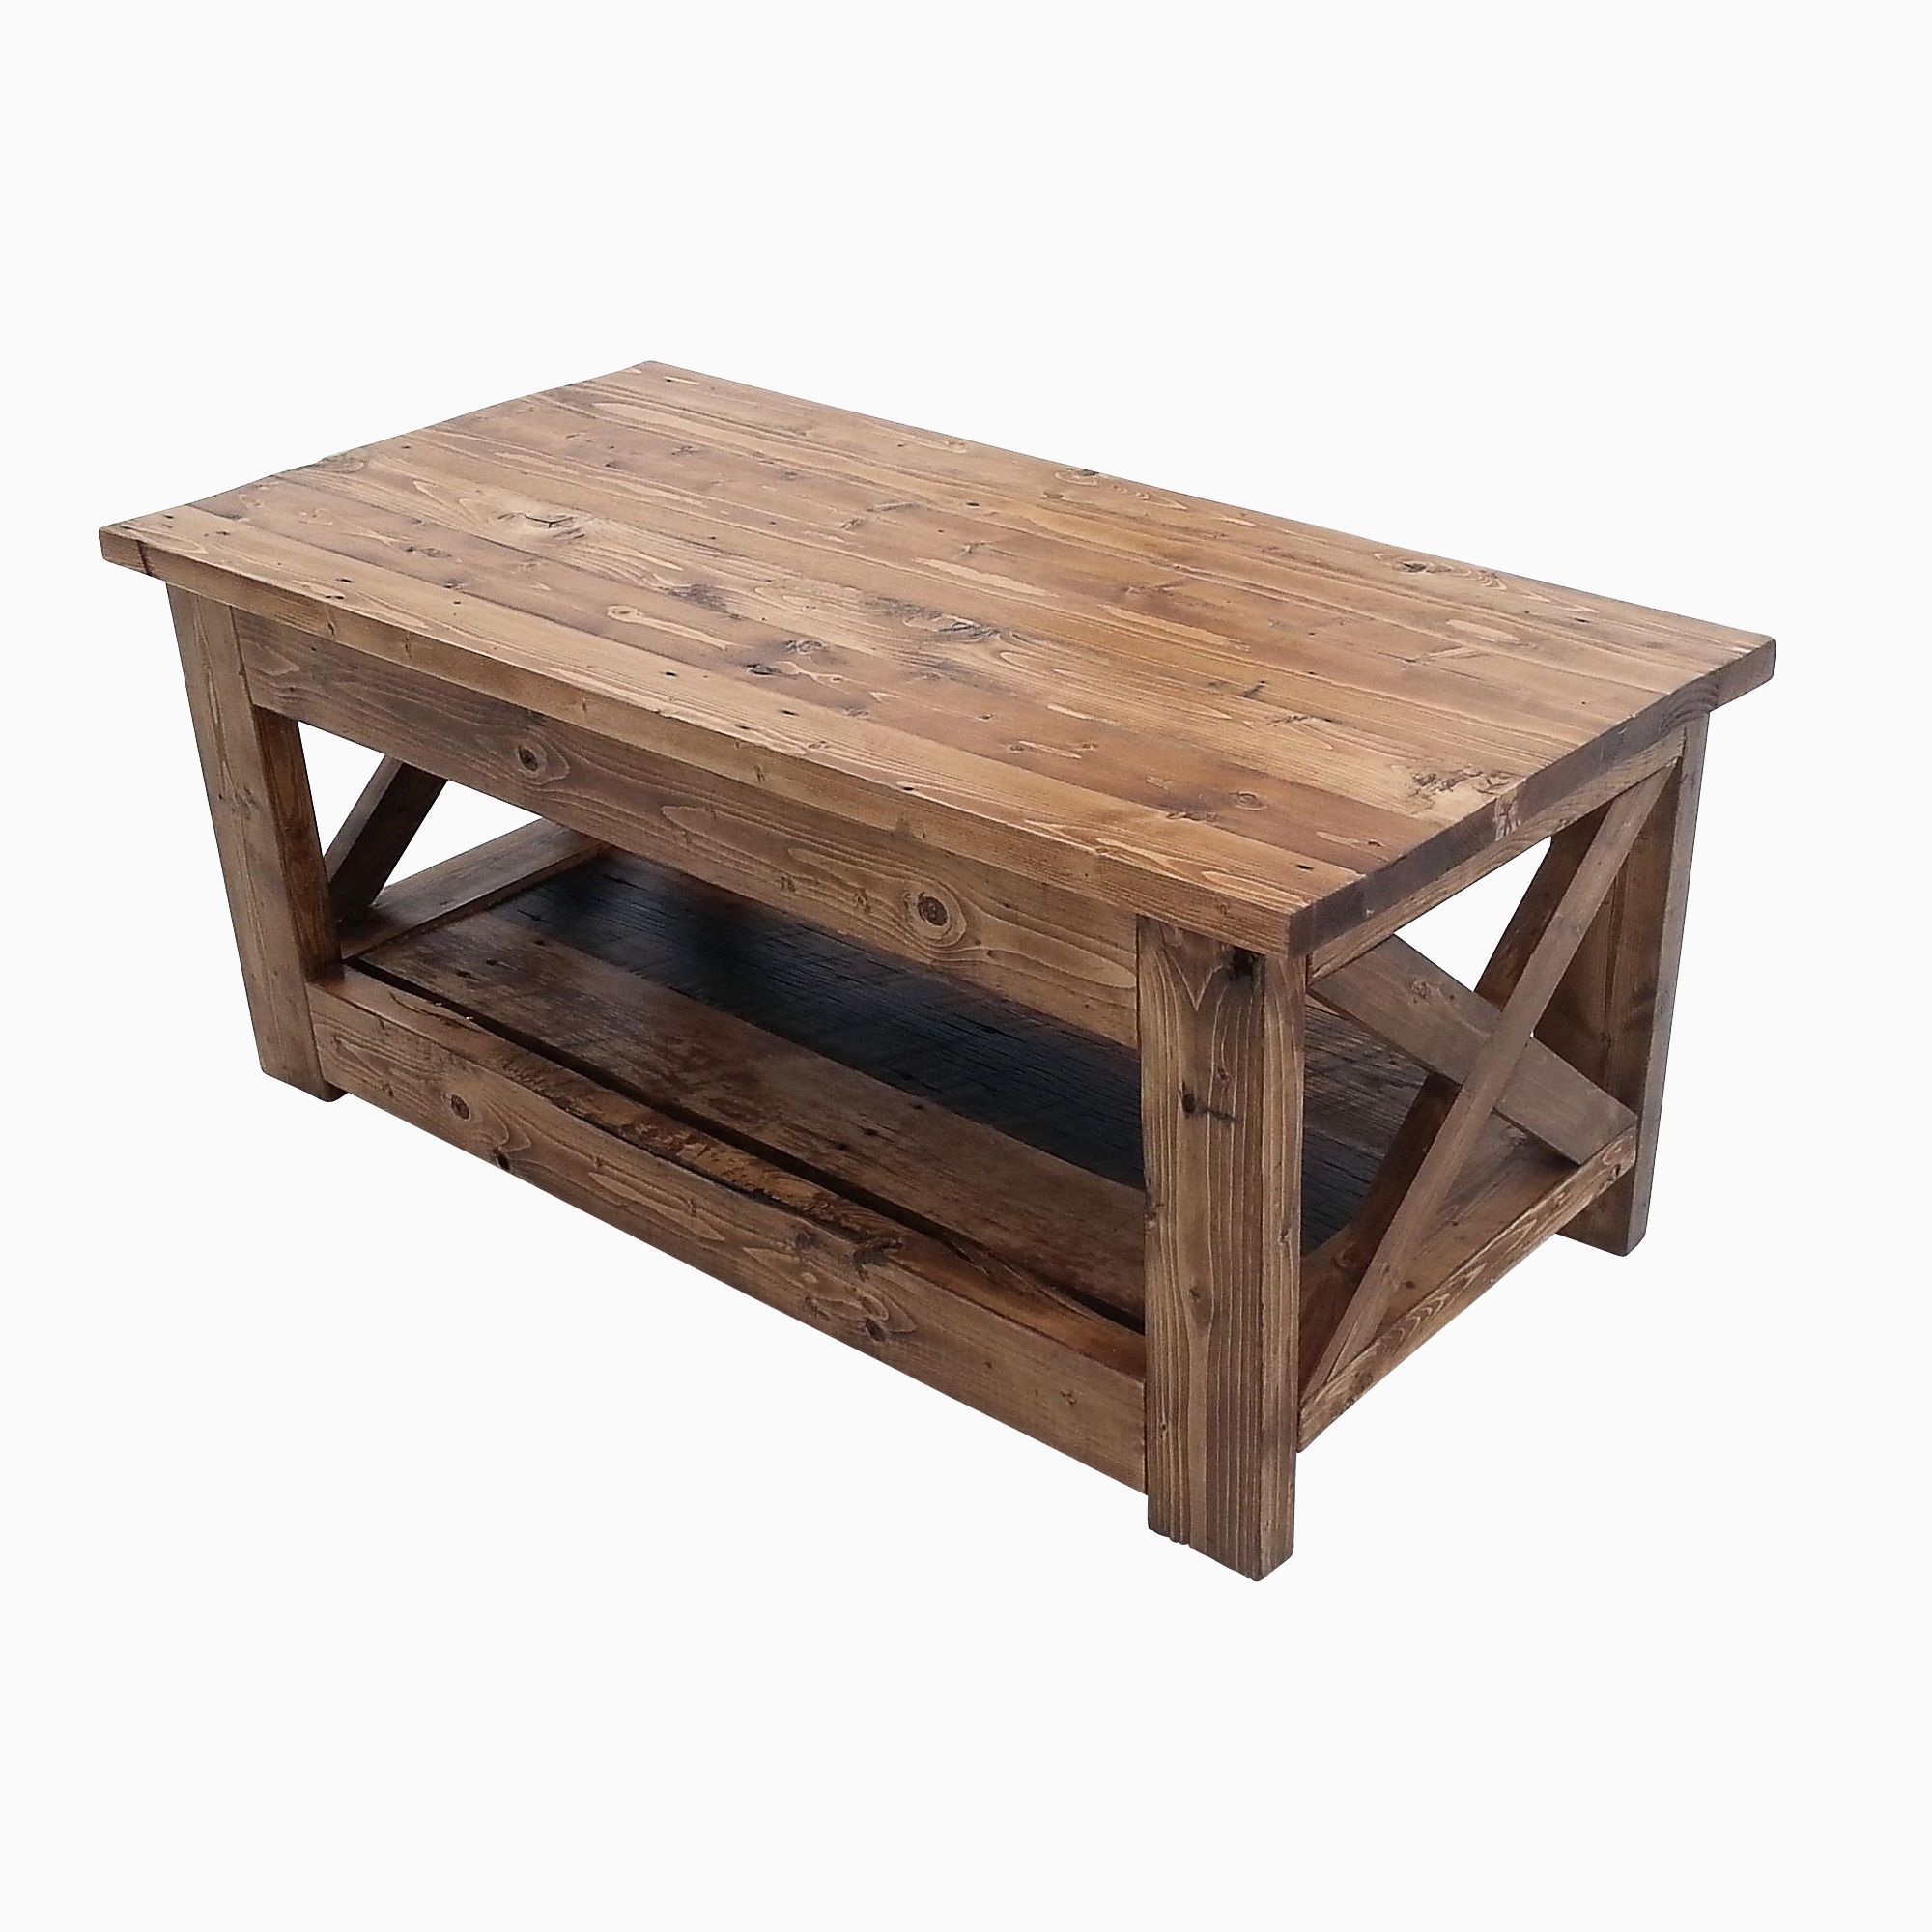 Buy Custom Reclaimed Wood Rustic Style Coffee Table, Made To Order From Within Rustic Wood Coffee Tables (Gallery 21 of 21)